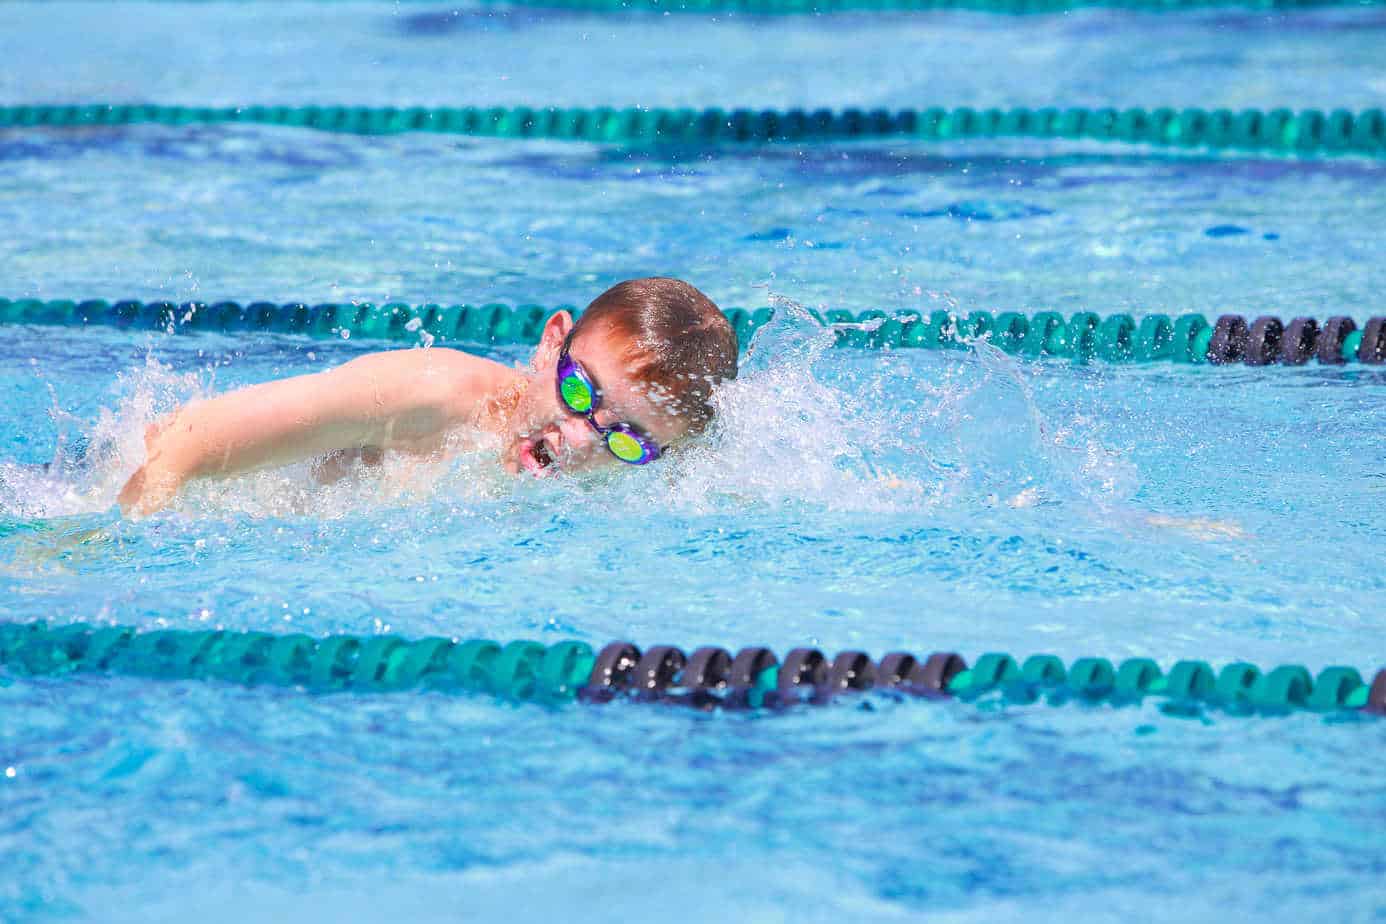 The meaning of 'freestyle' in competitive swimming - Bluffton Sun